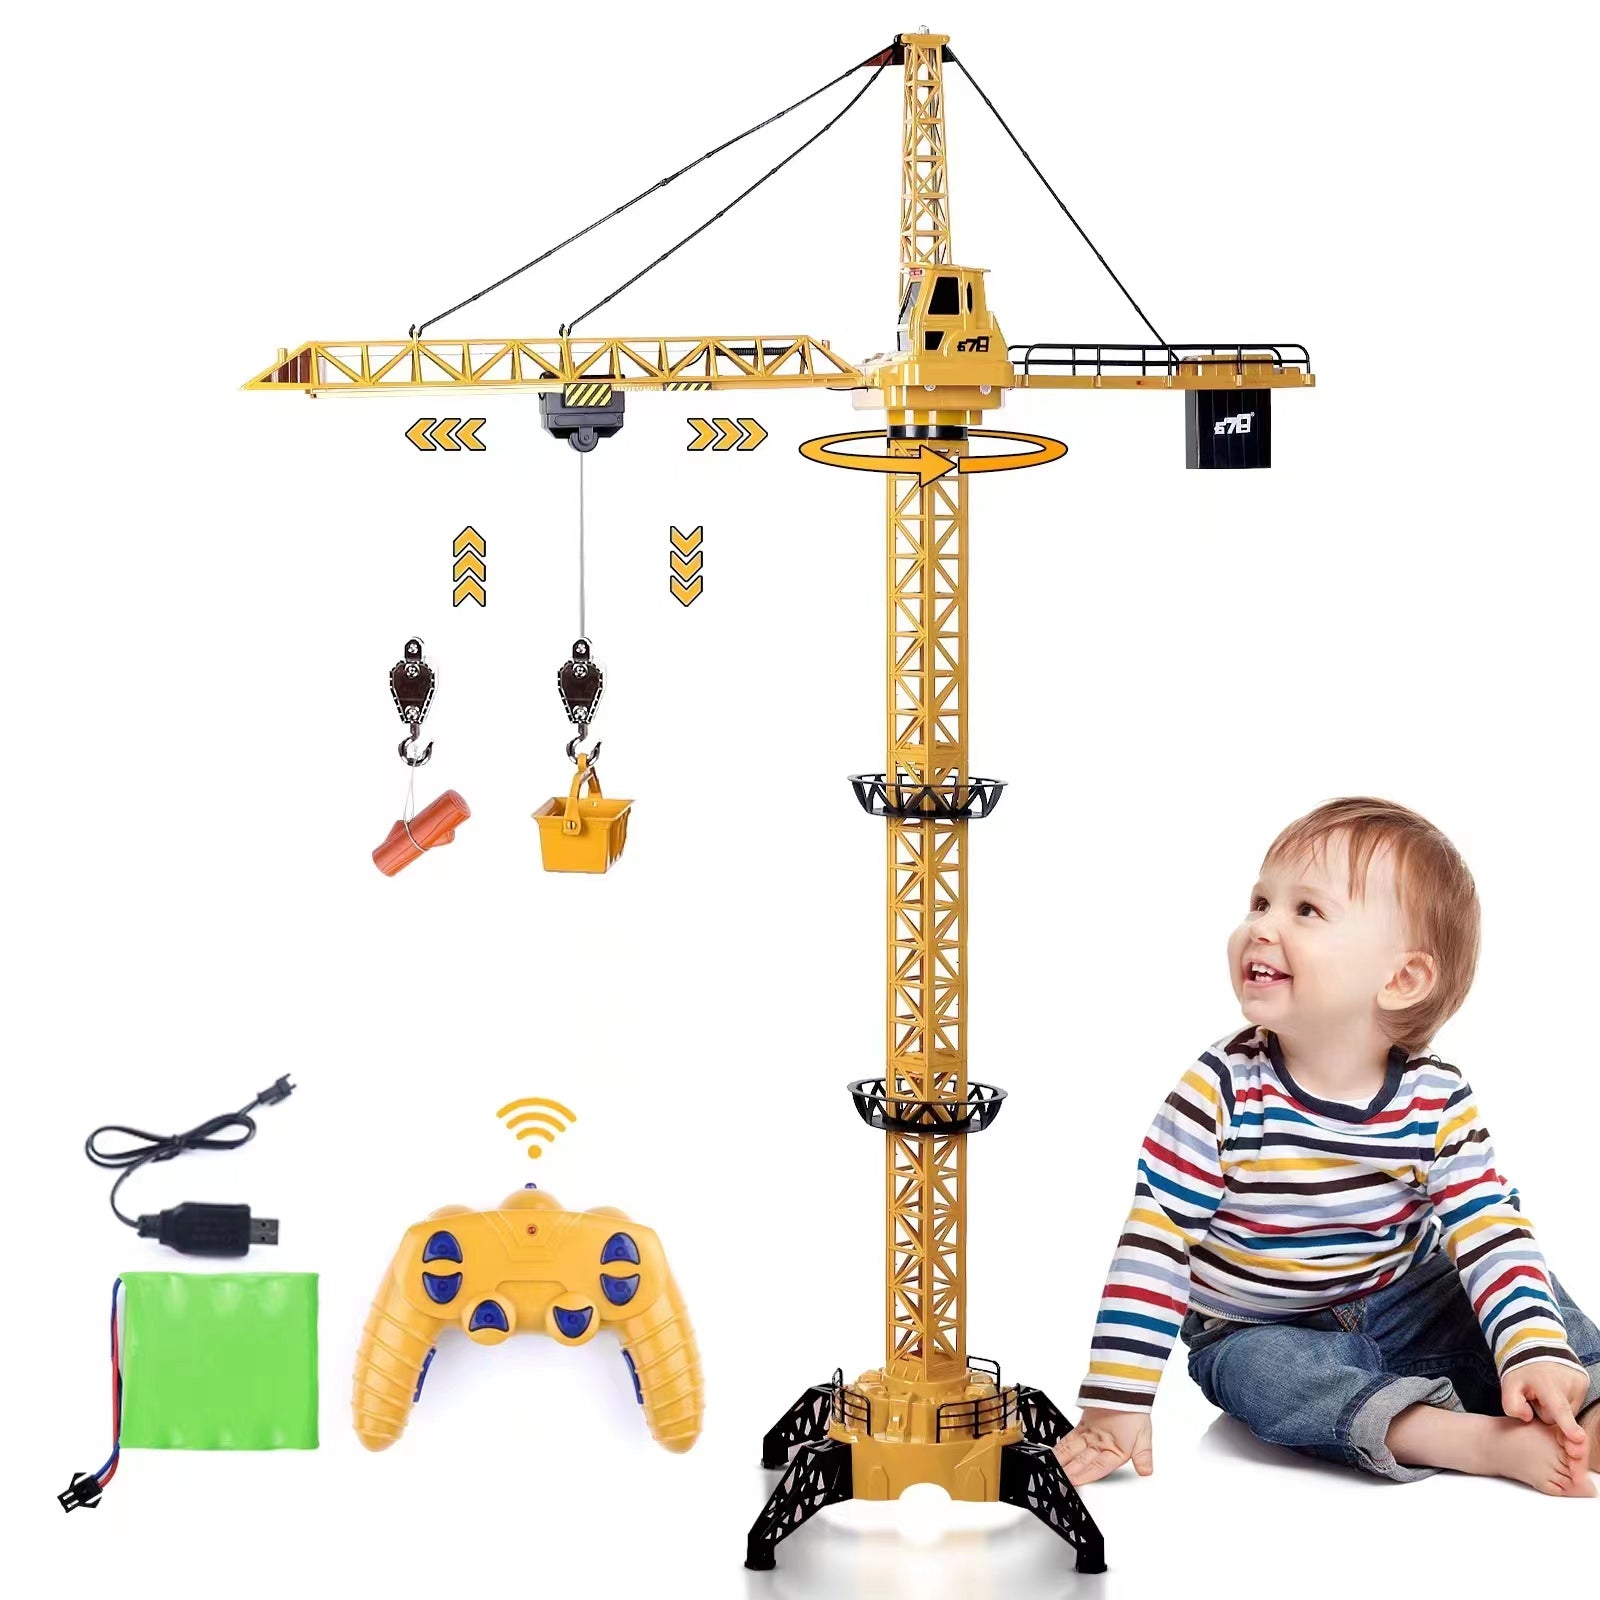 Remote Control Crane Toy Construction Vehicles Educational RC Crane Toy for  Kids for Christmas Birthdays-M-CY